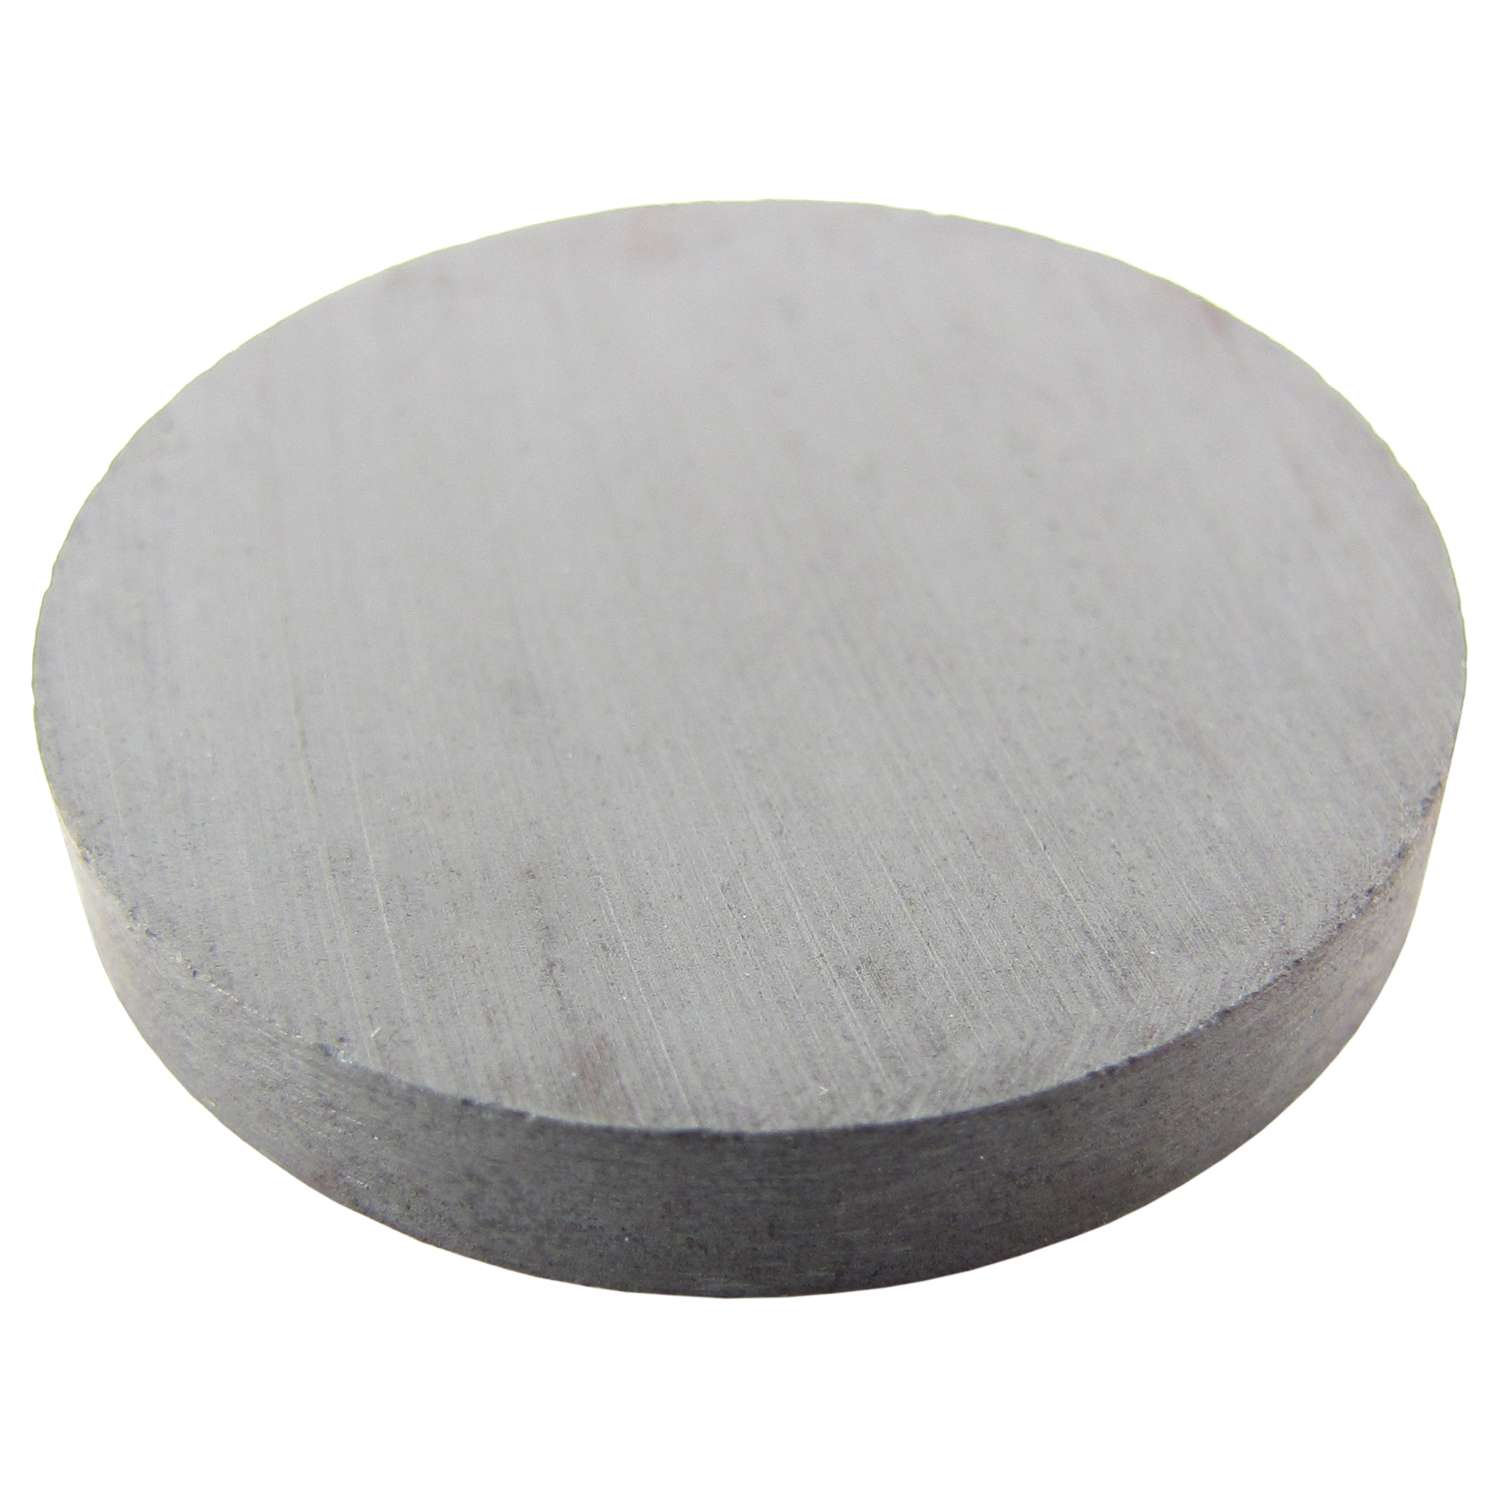 Magnet Source 07004 Magnetic Discs Ceramic Charcoal Gray